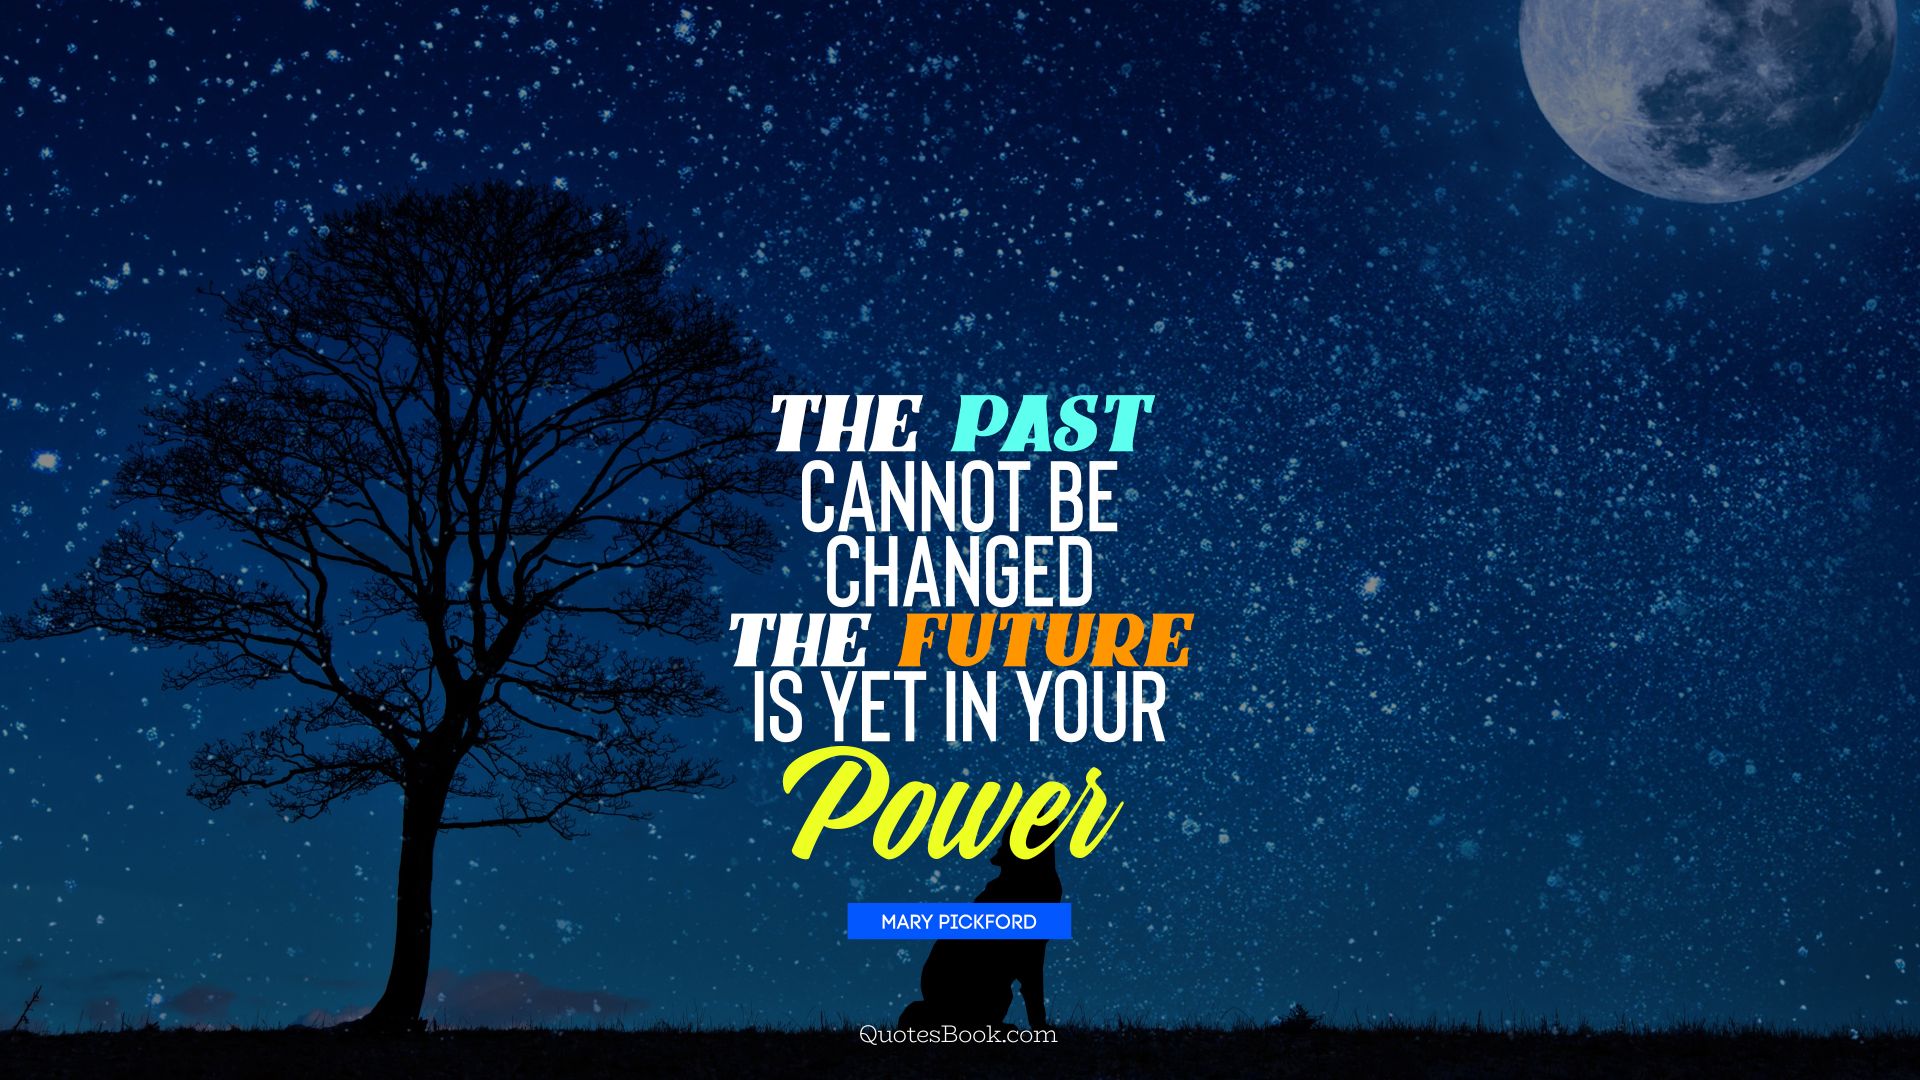 The past cannot be changed, the future is yet  in your power. - Quote by Mary Pickford